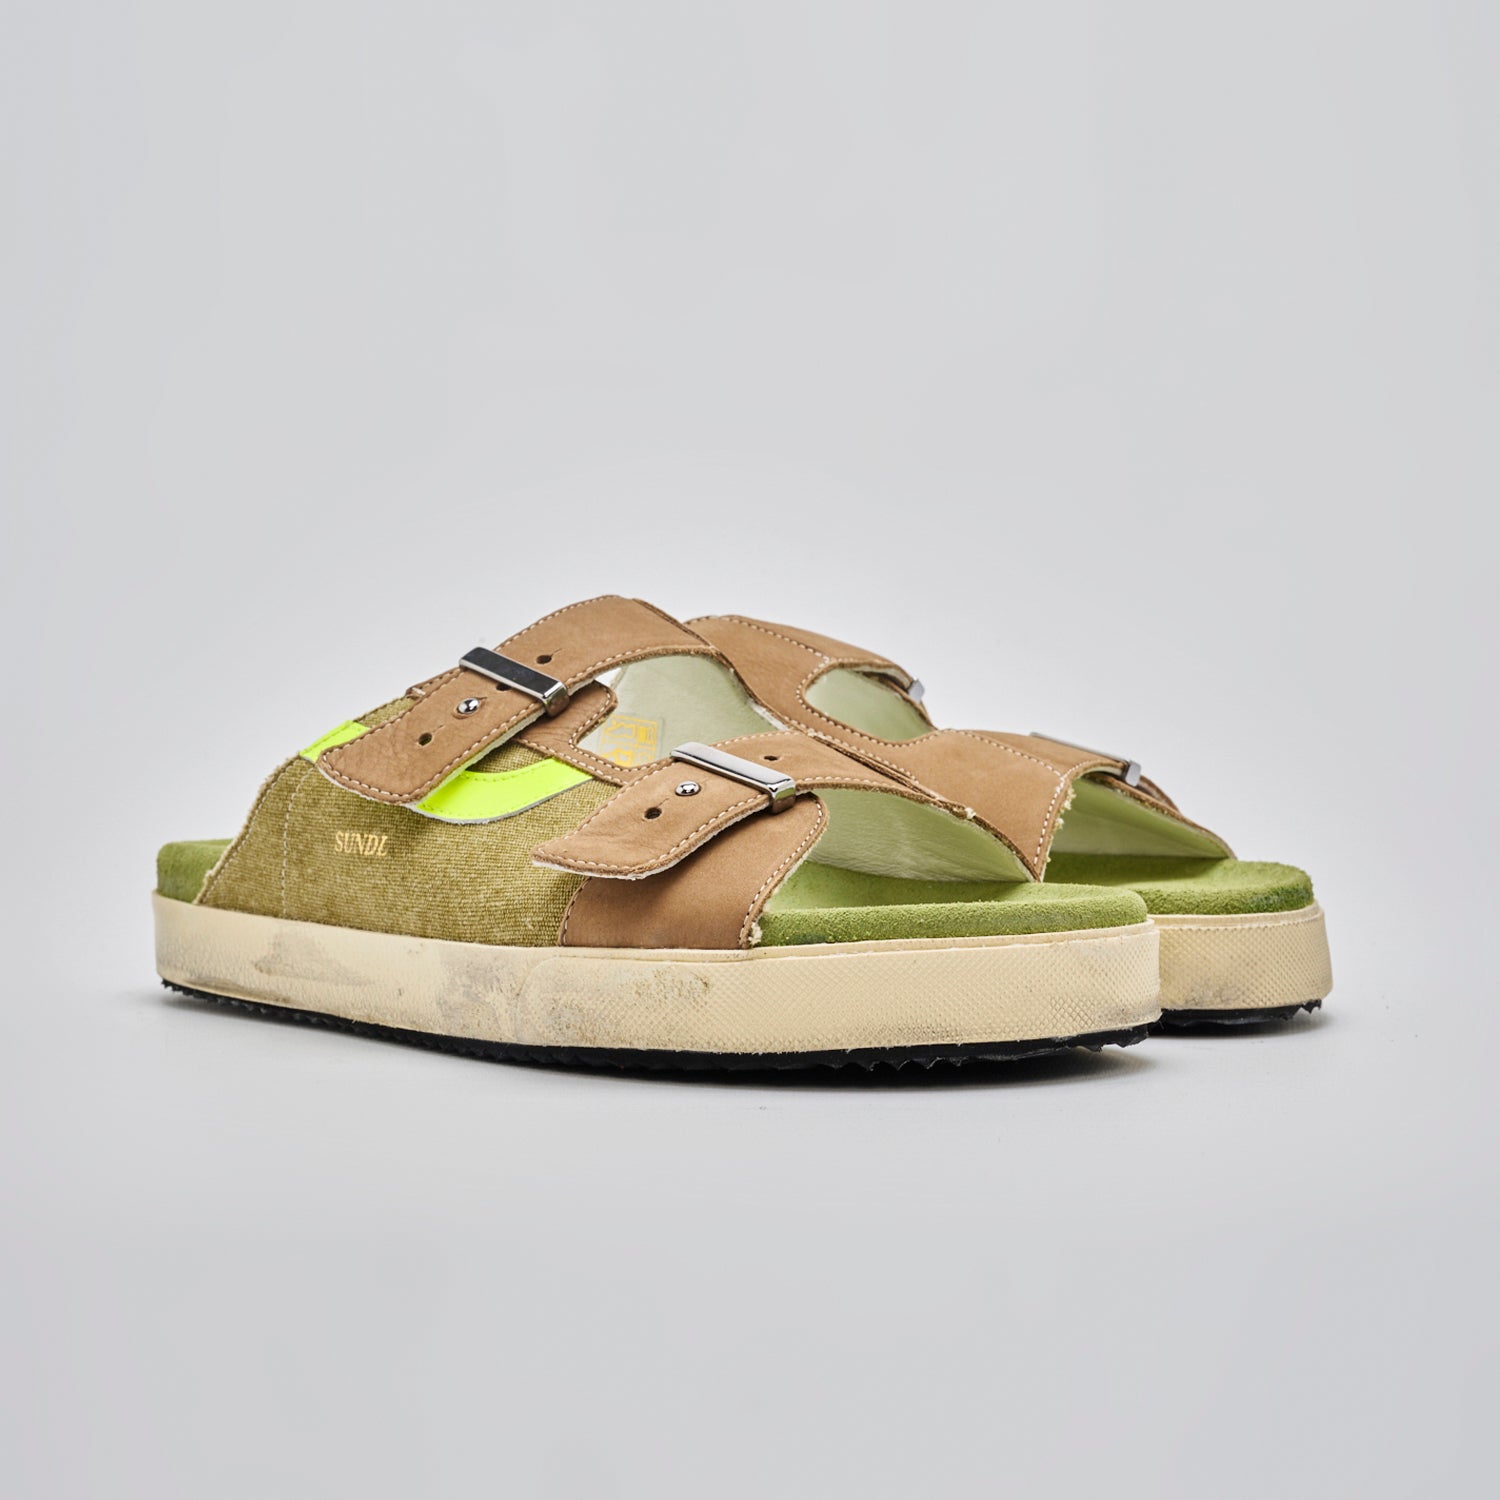 Sundl Olive/Fluo Yellow